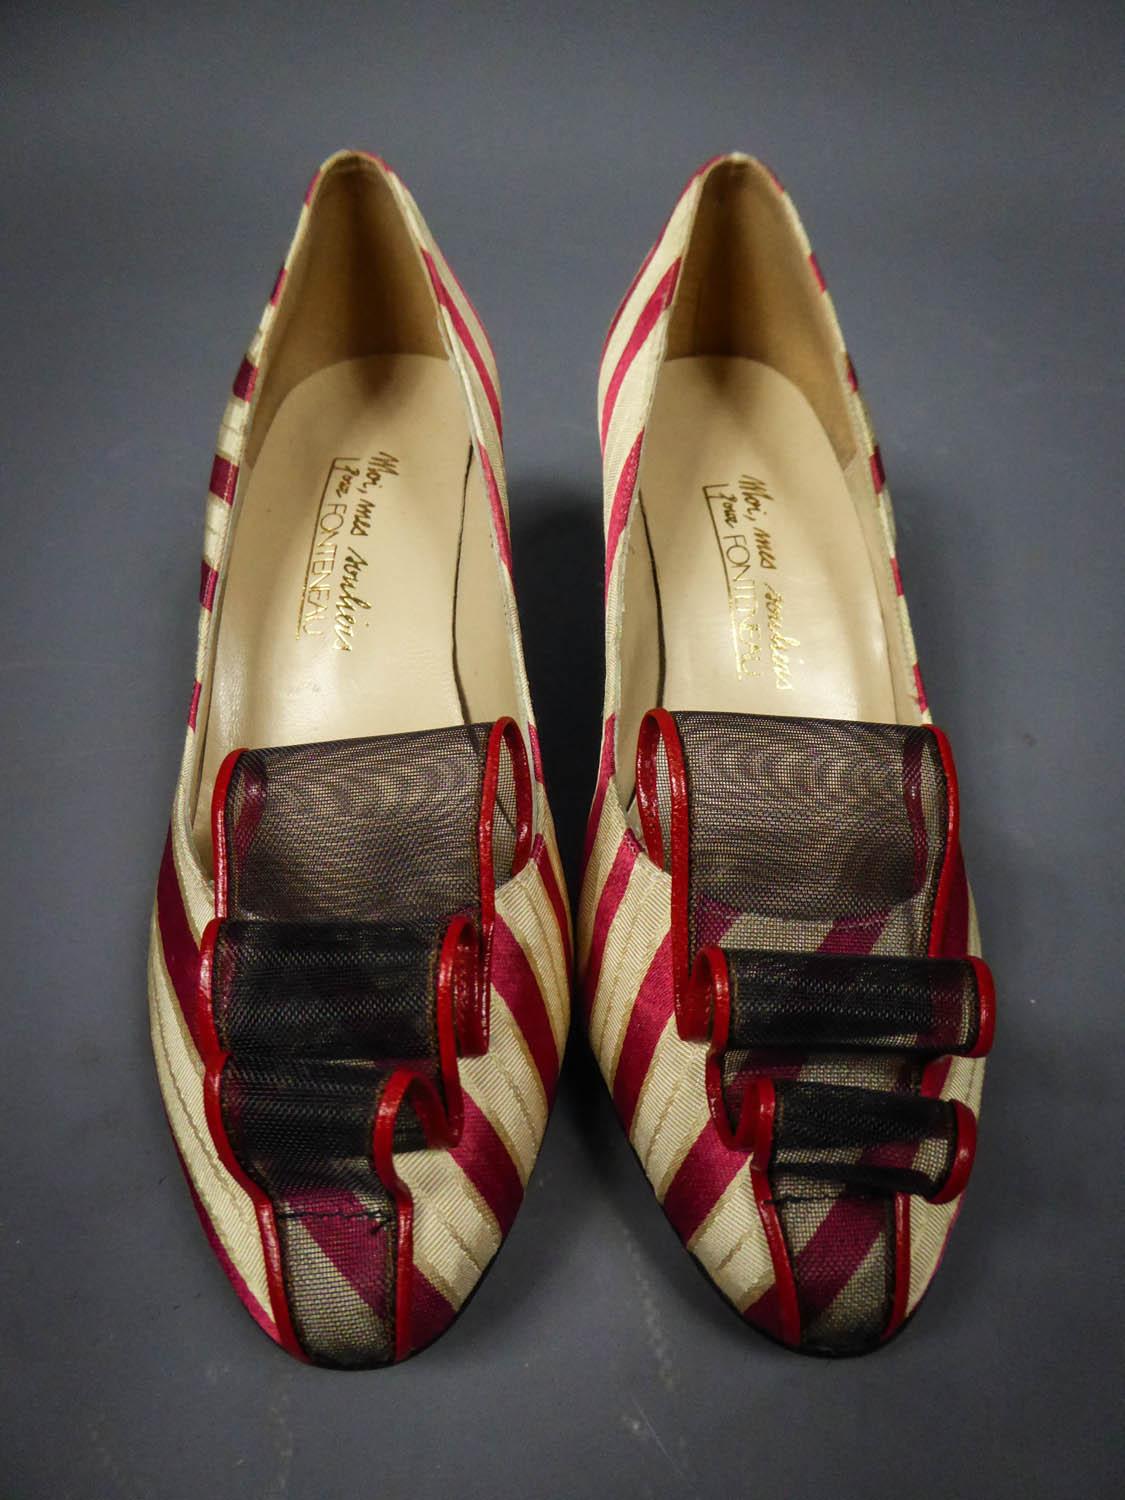 Numbered Fonteneau French Heels Shoes Titled Moi, Mes Souliers Circa 1960 2